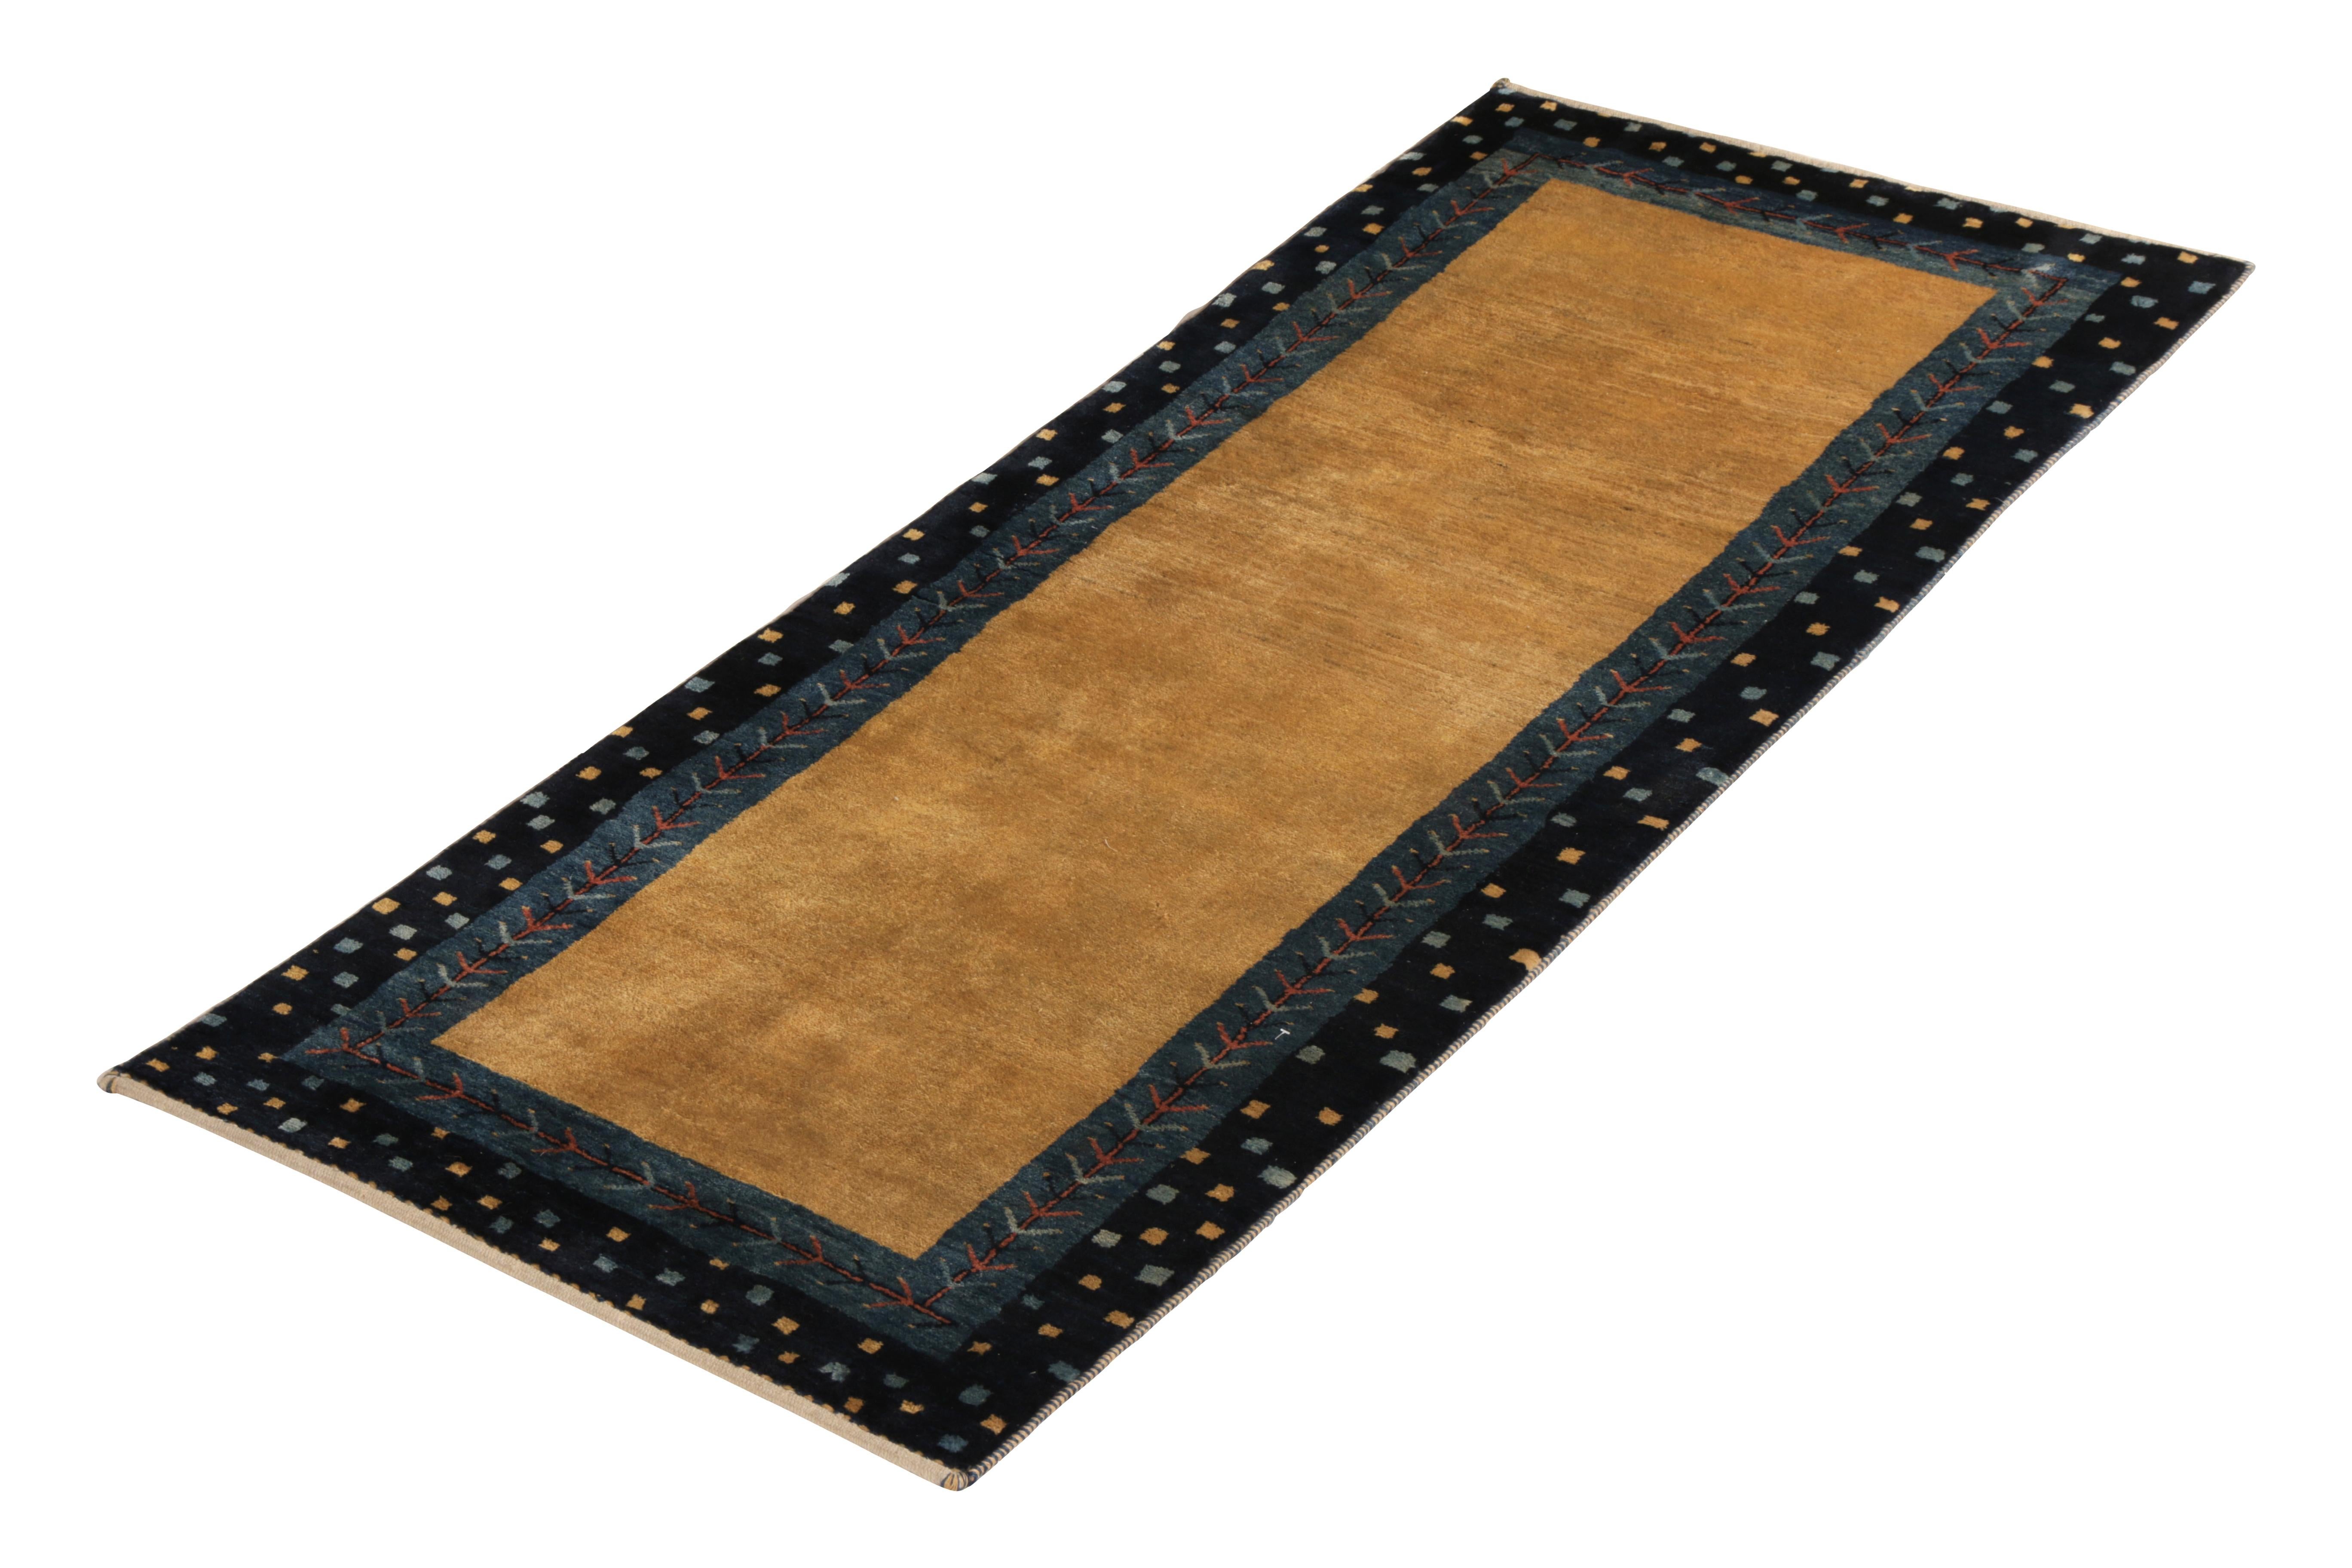 Hand knotted in wool originating from the Gabbeh tribal weavers made in 1985, this vintage Persian runner draws on the classic open-field rug and tribal border patterns of antique and vintage Gabbeh rug weavers, sporting a lush pile height and